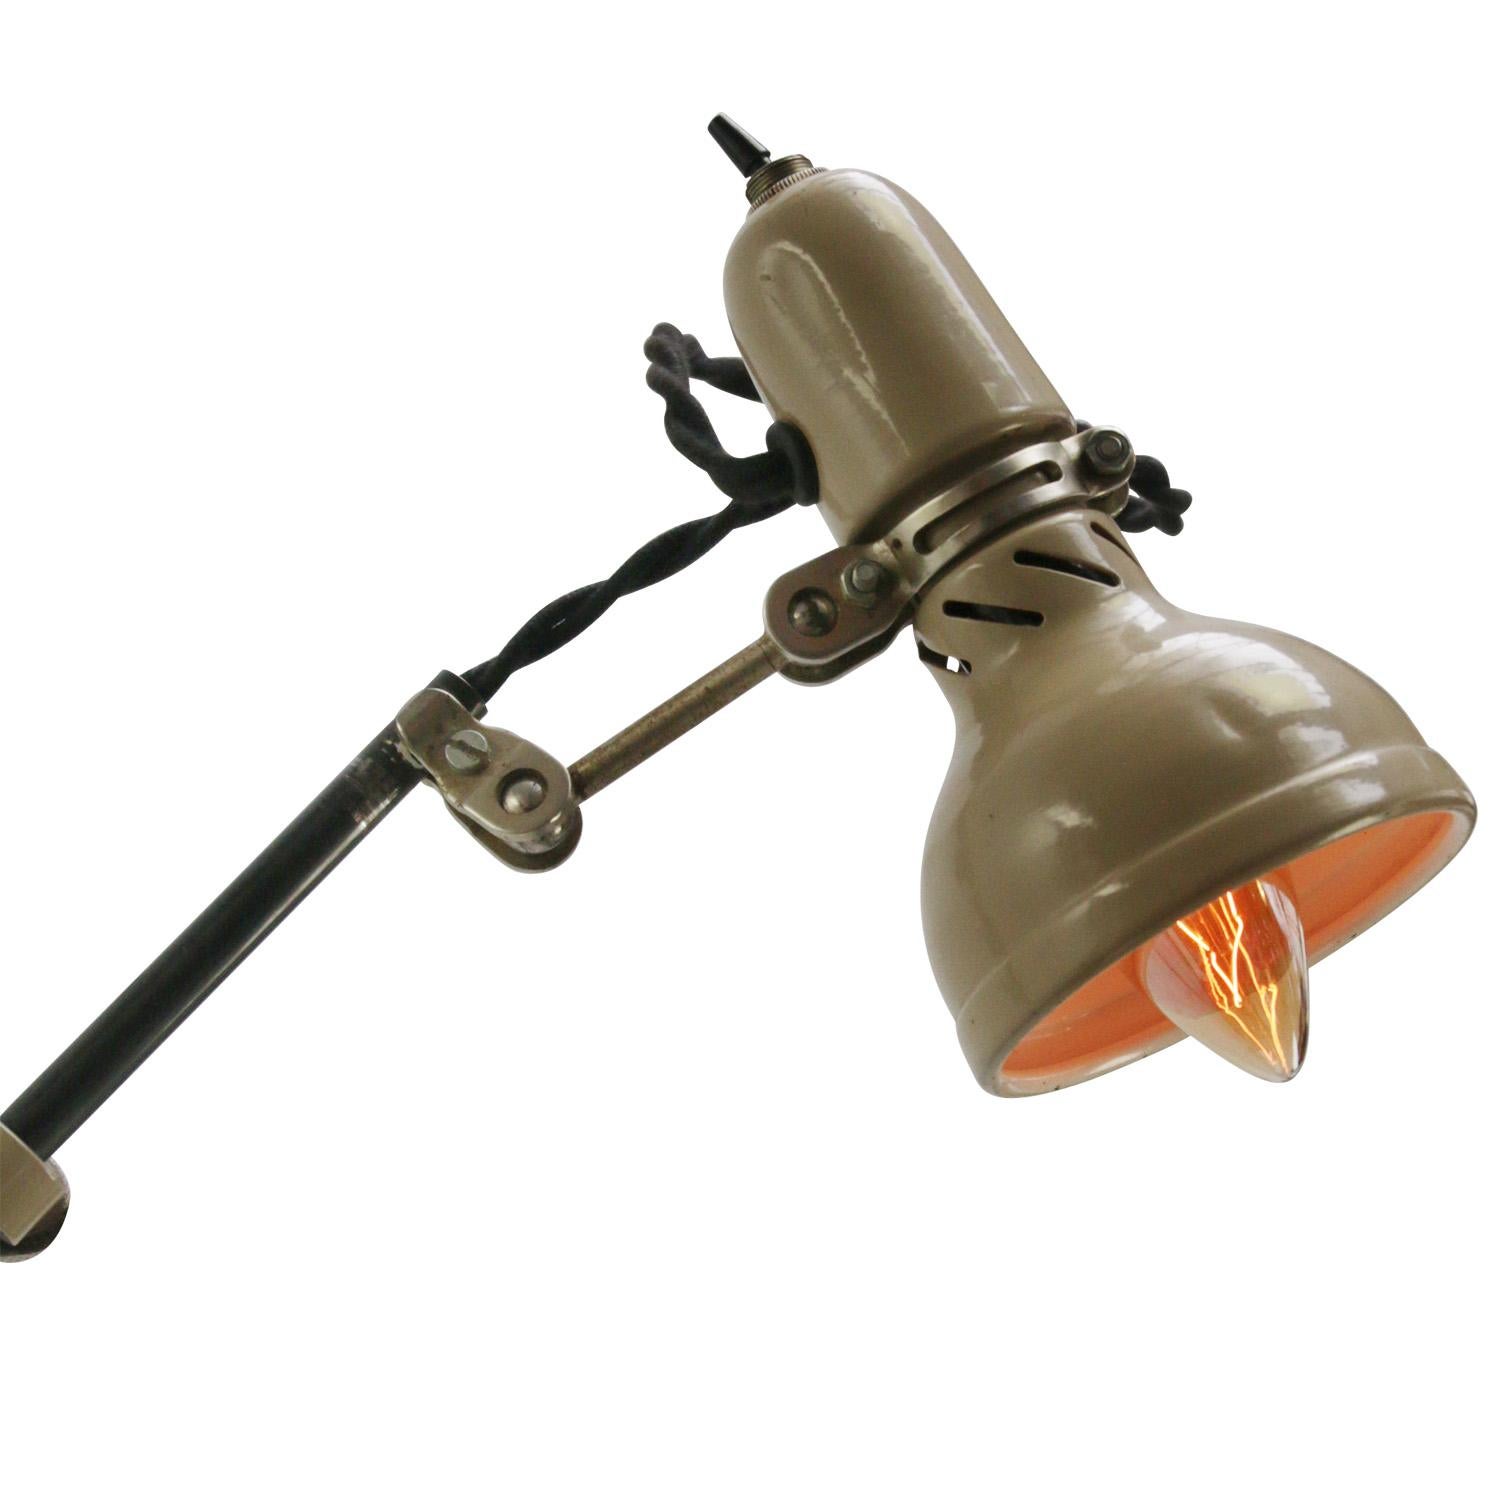 Industrial work light with metal shade by Lumina, France.
Including plug and switch on shade.

Weight: 1.20 kg / 2.6 lb

E14 screw bulb size.

Priced per individual item. All lamps have been made suitable by international standards for